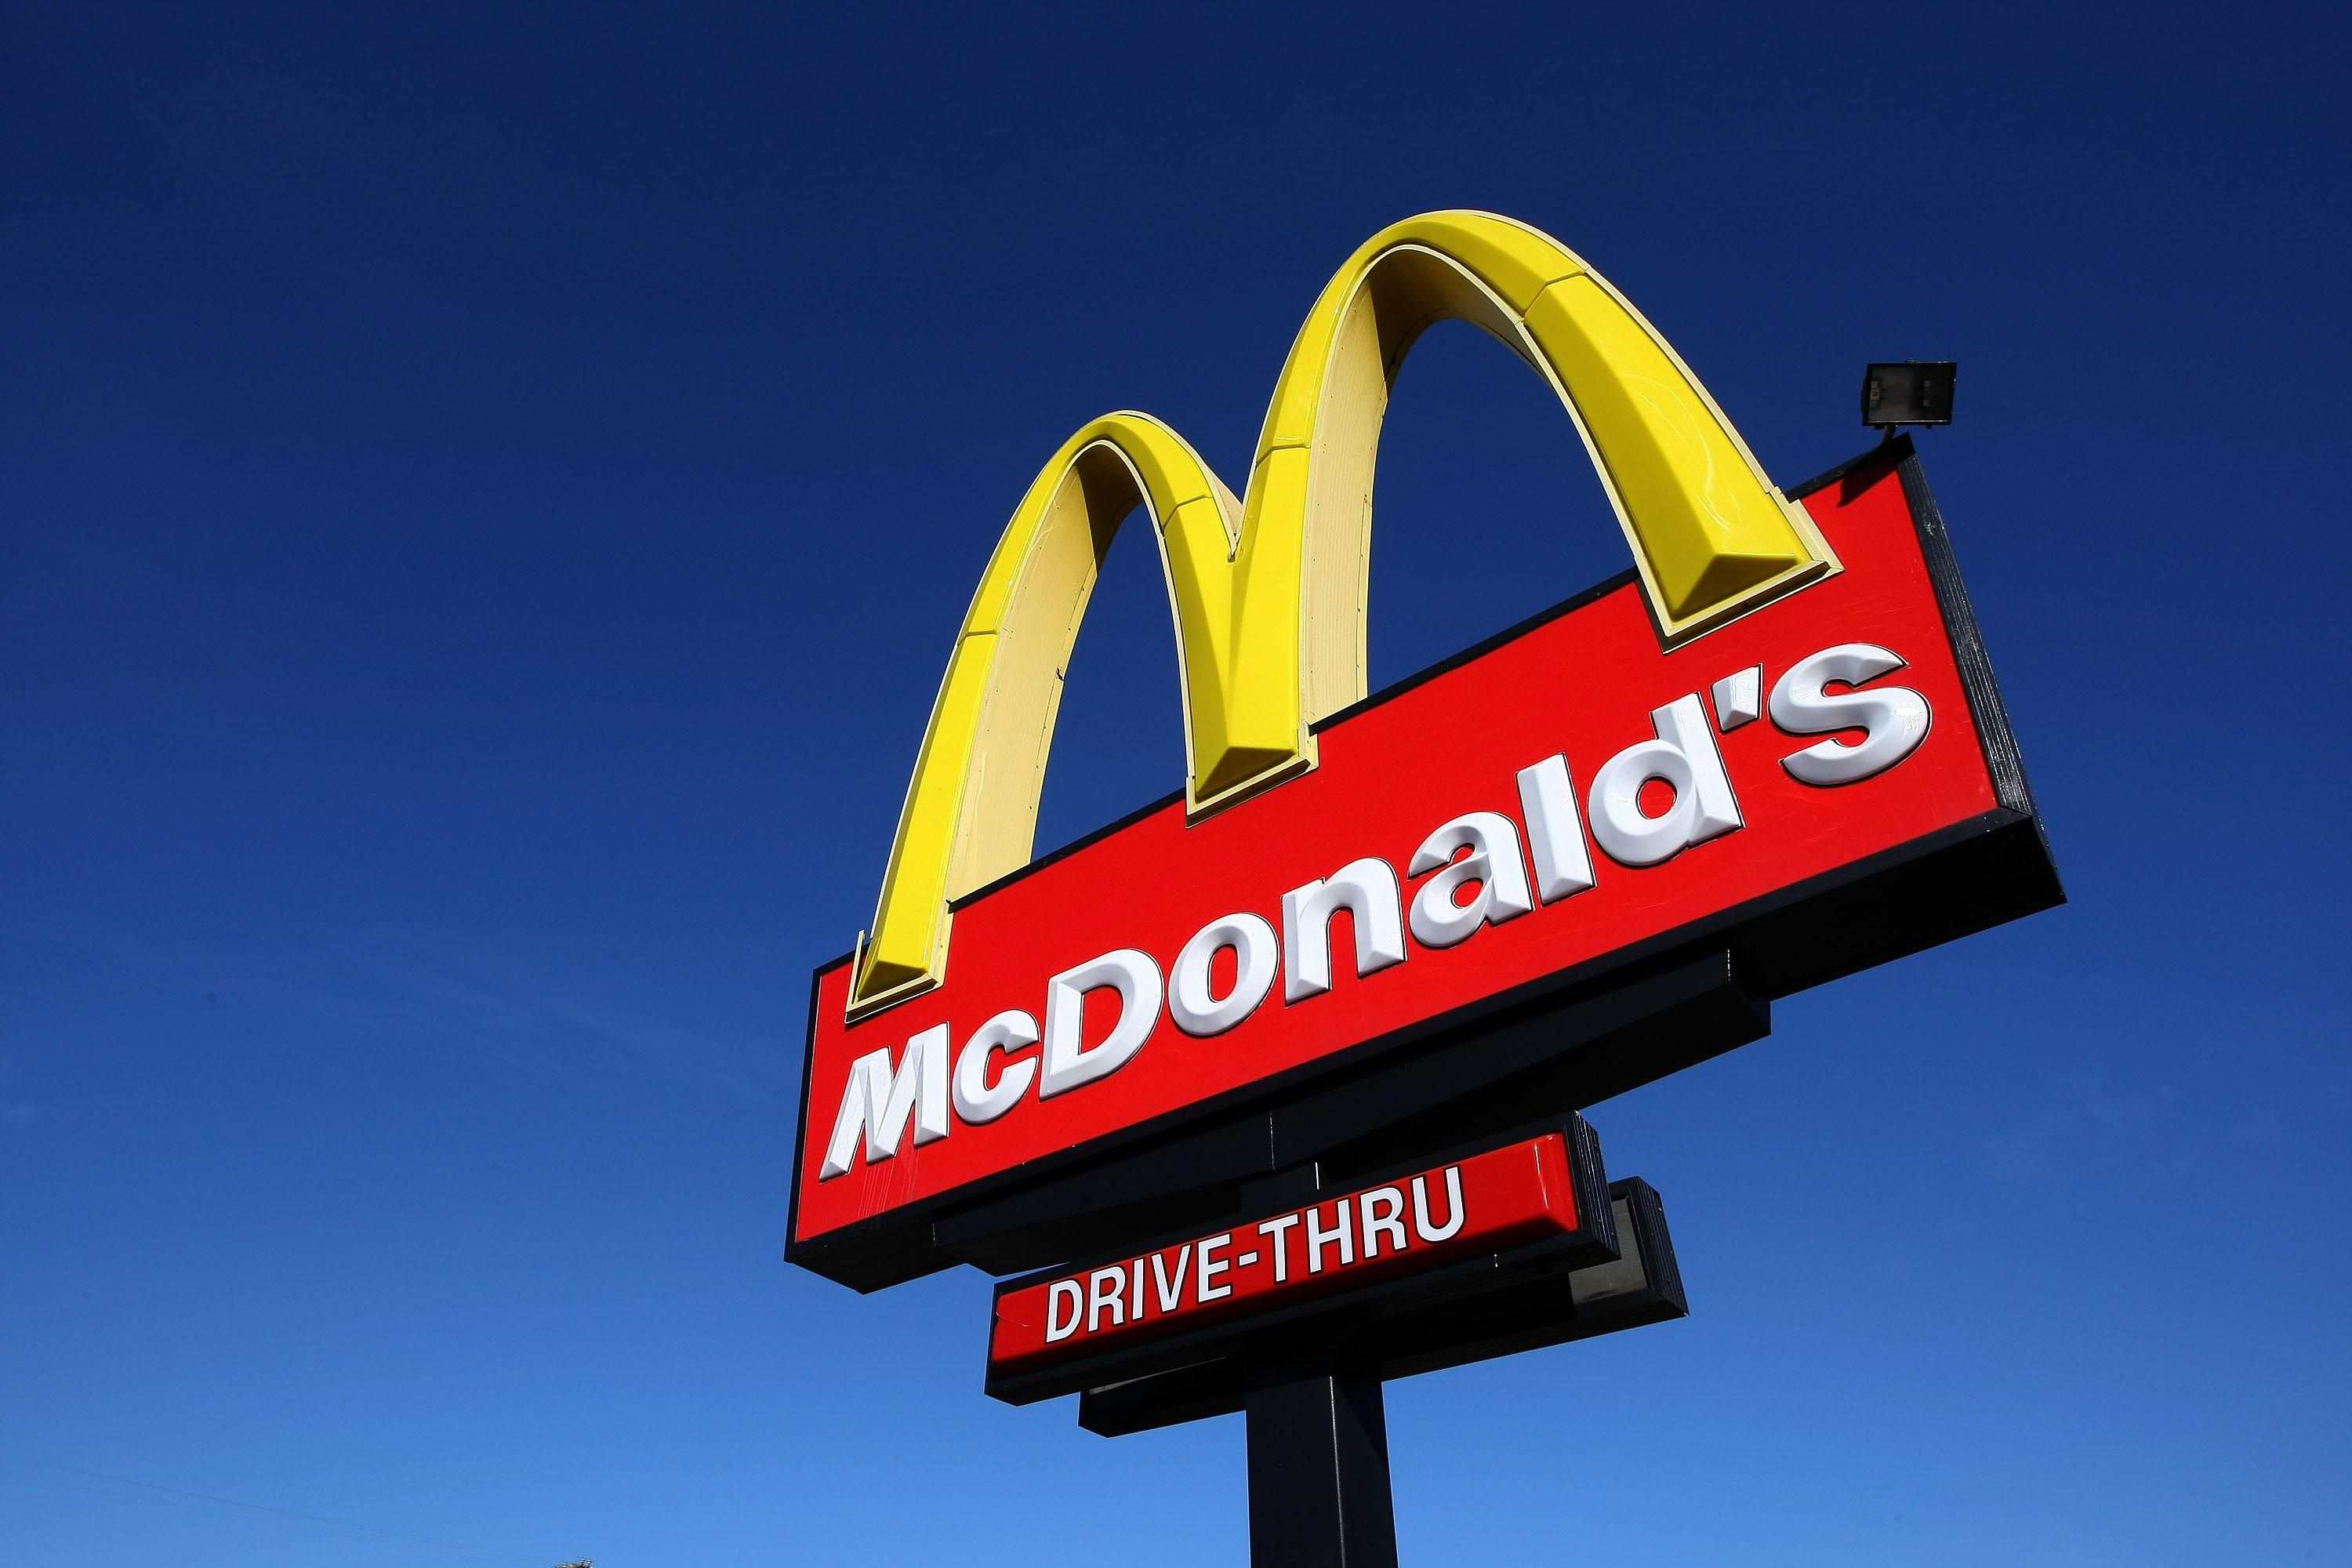 Mcdonalds Franchise Agreement Mcdonalds Franchise Review Information And Costs